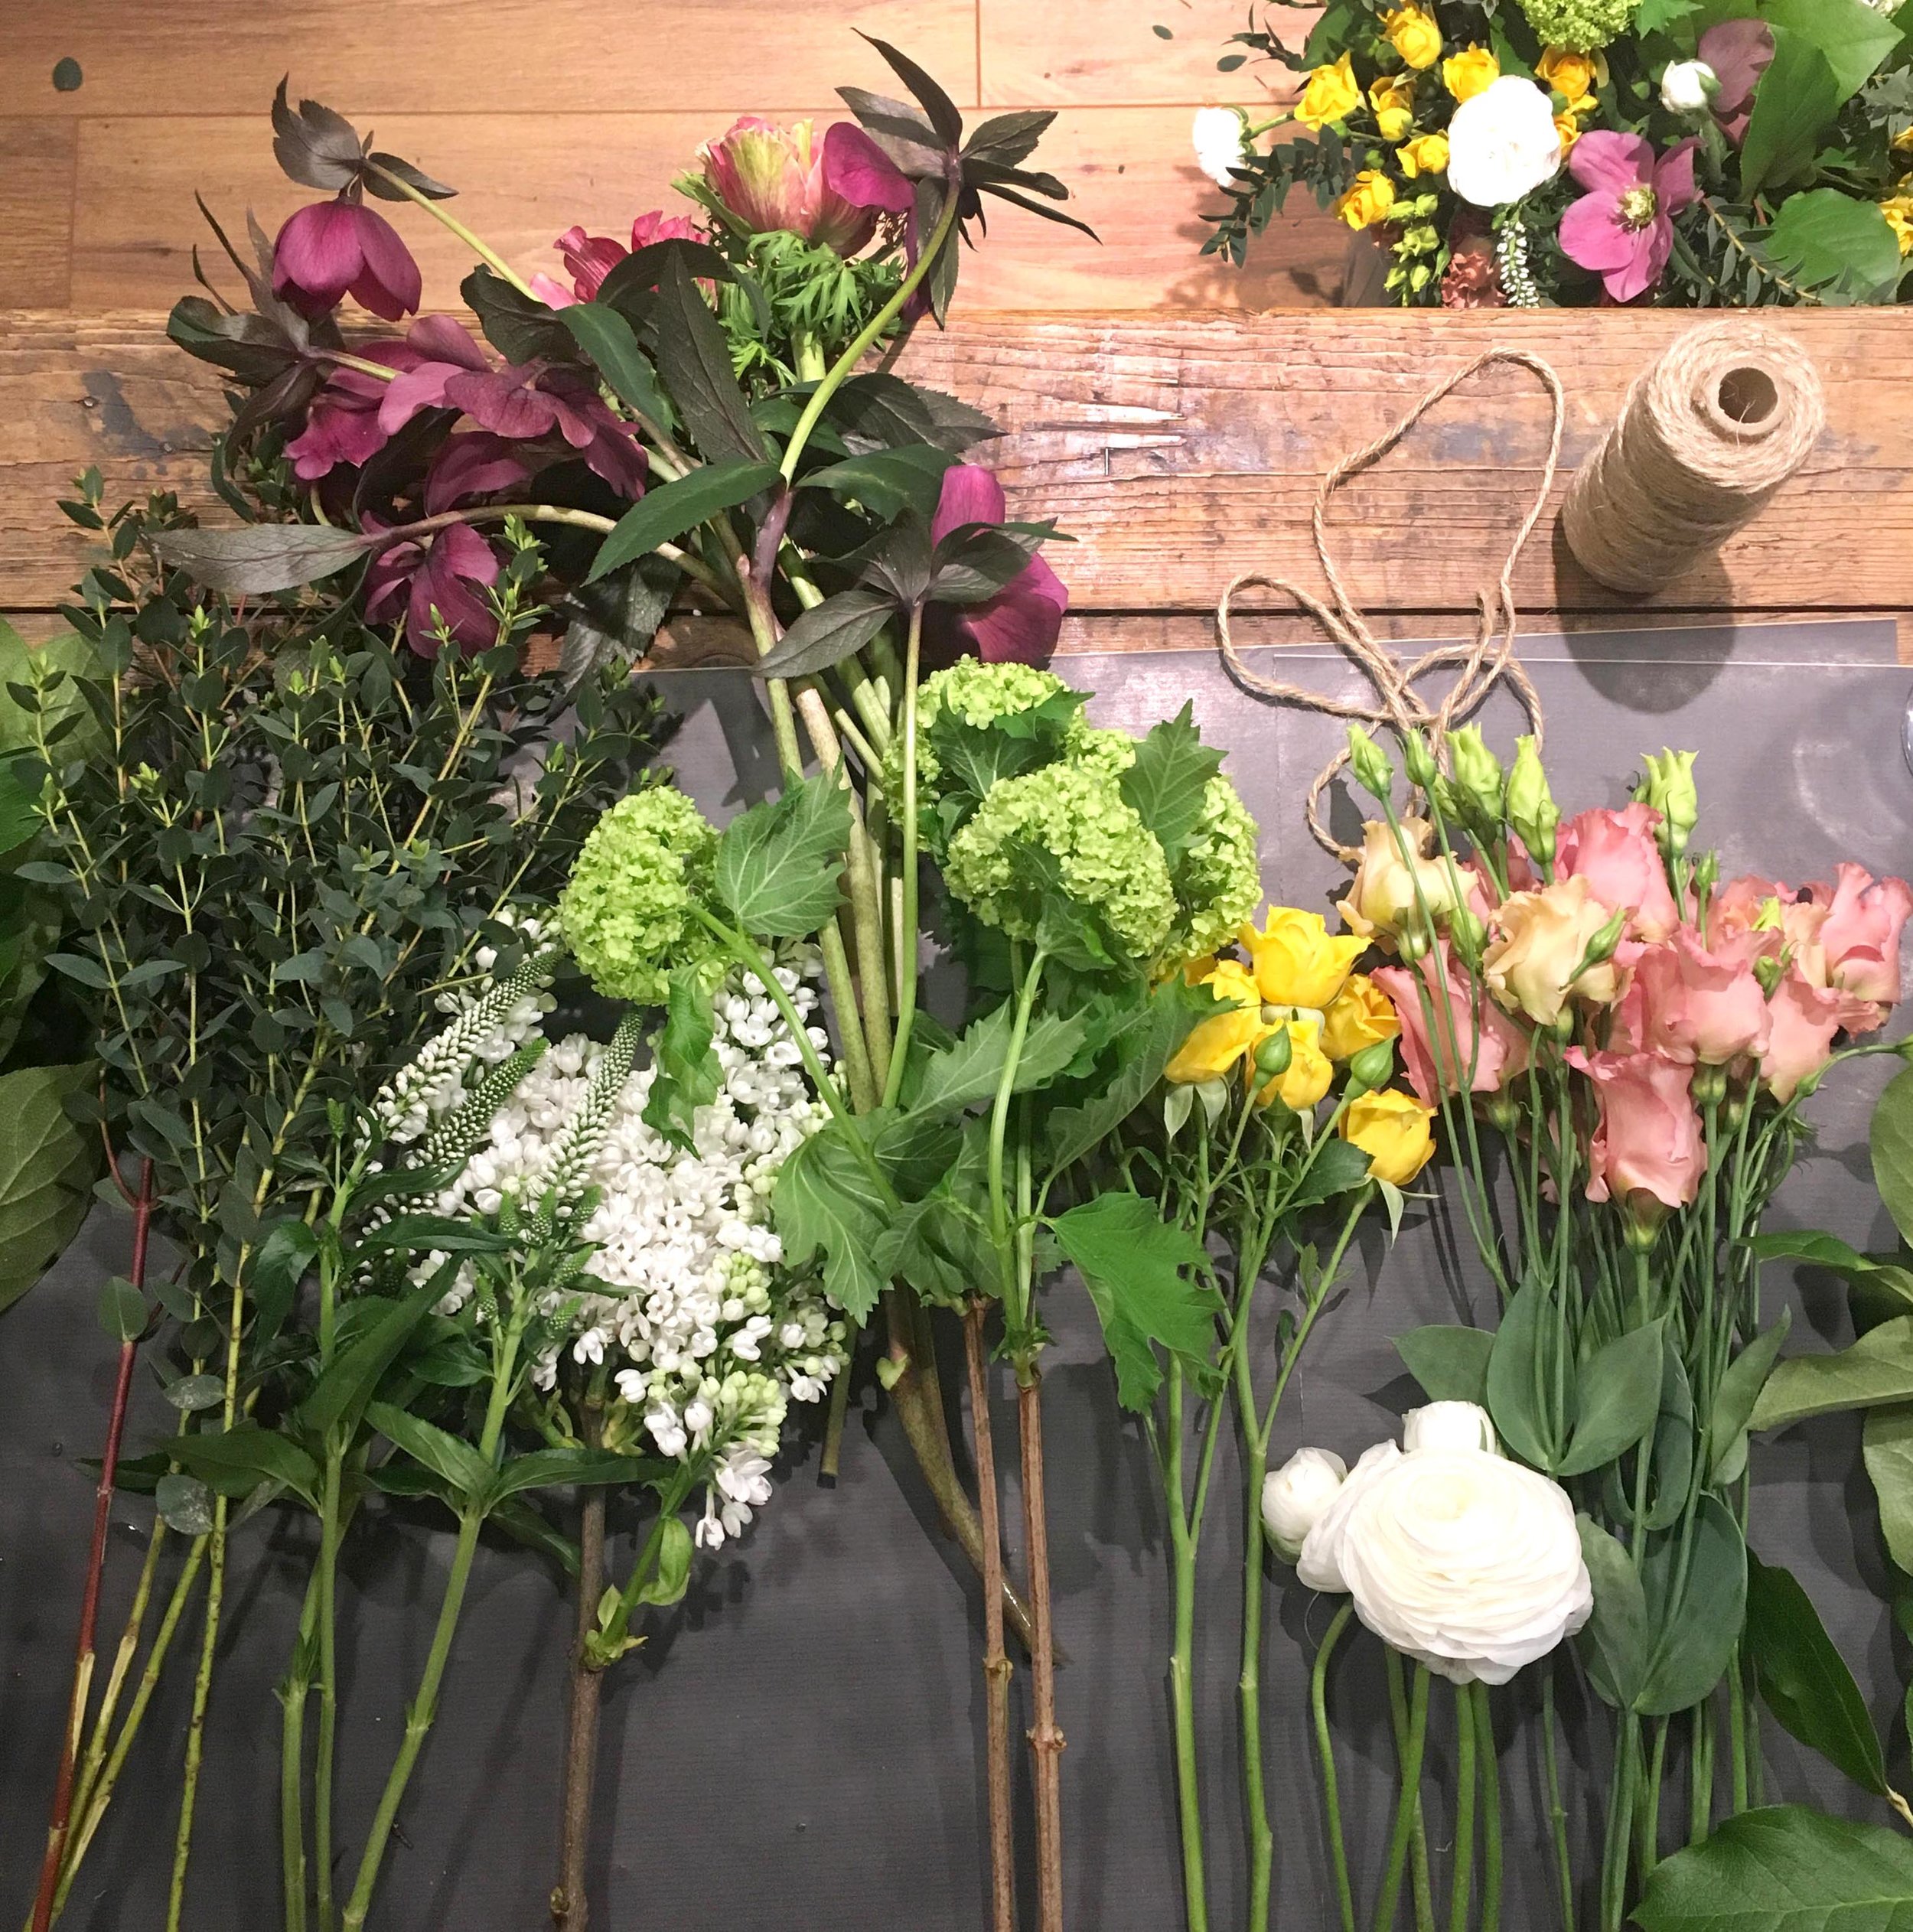 Floral workshop hosted by Inspired Collective at Sarah and Bendrix